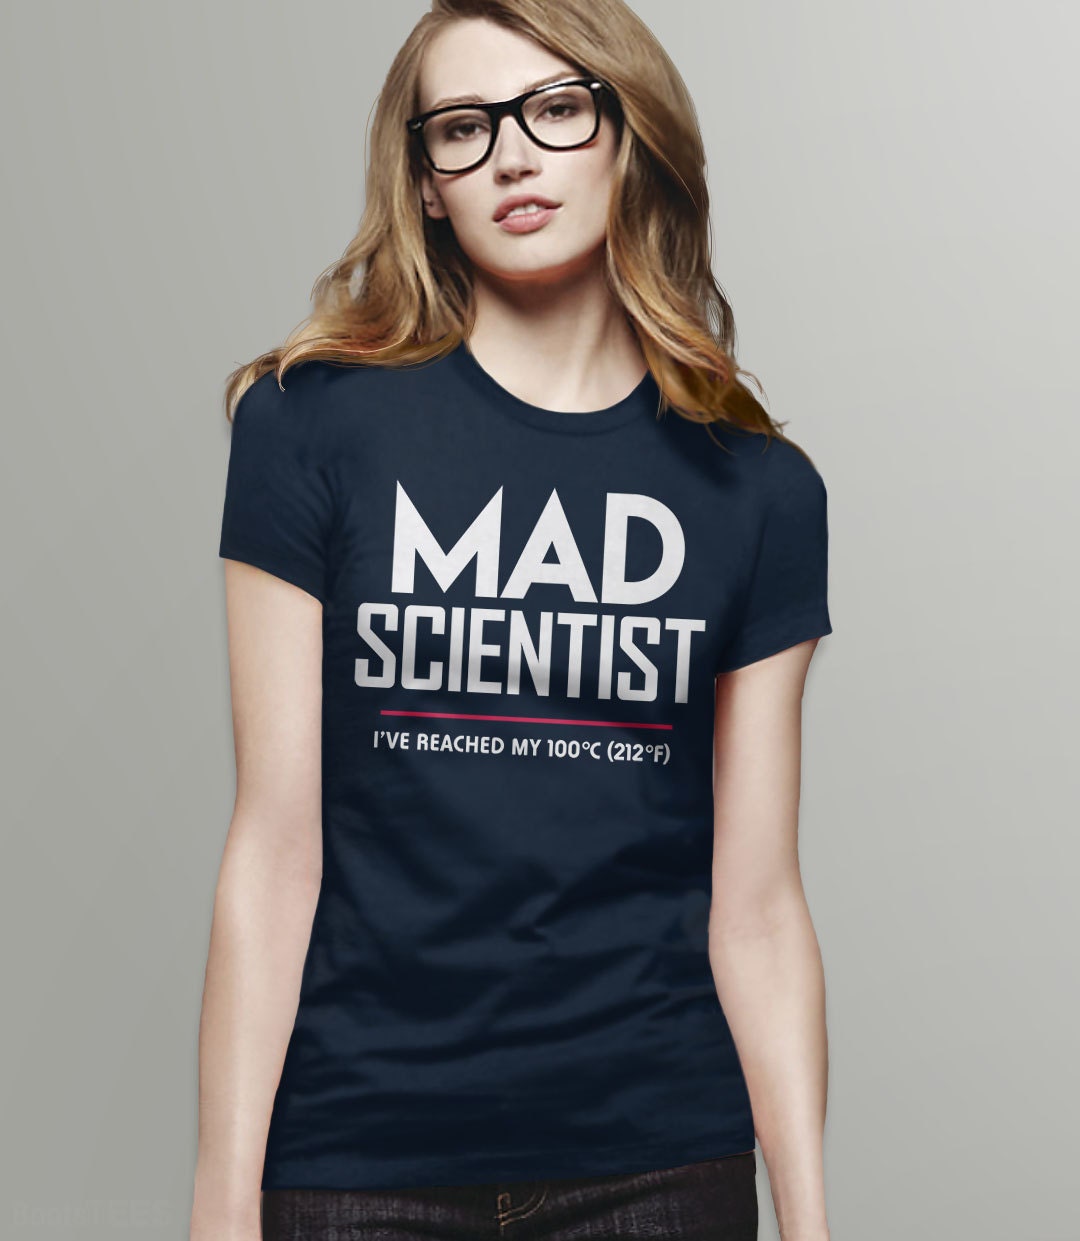 Mad Scientist Shirt, Black Unisex S by BootsTees